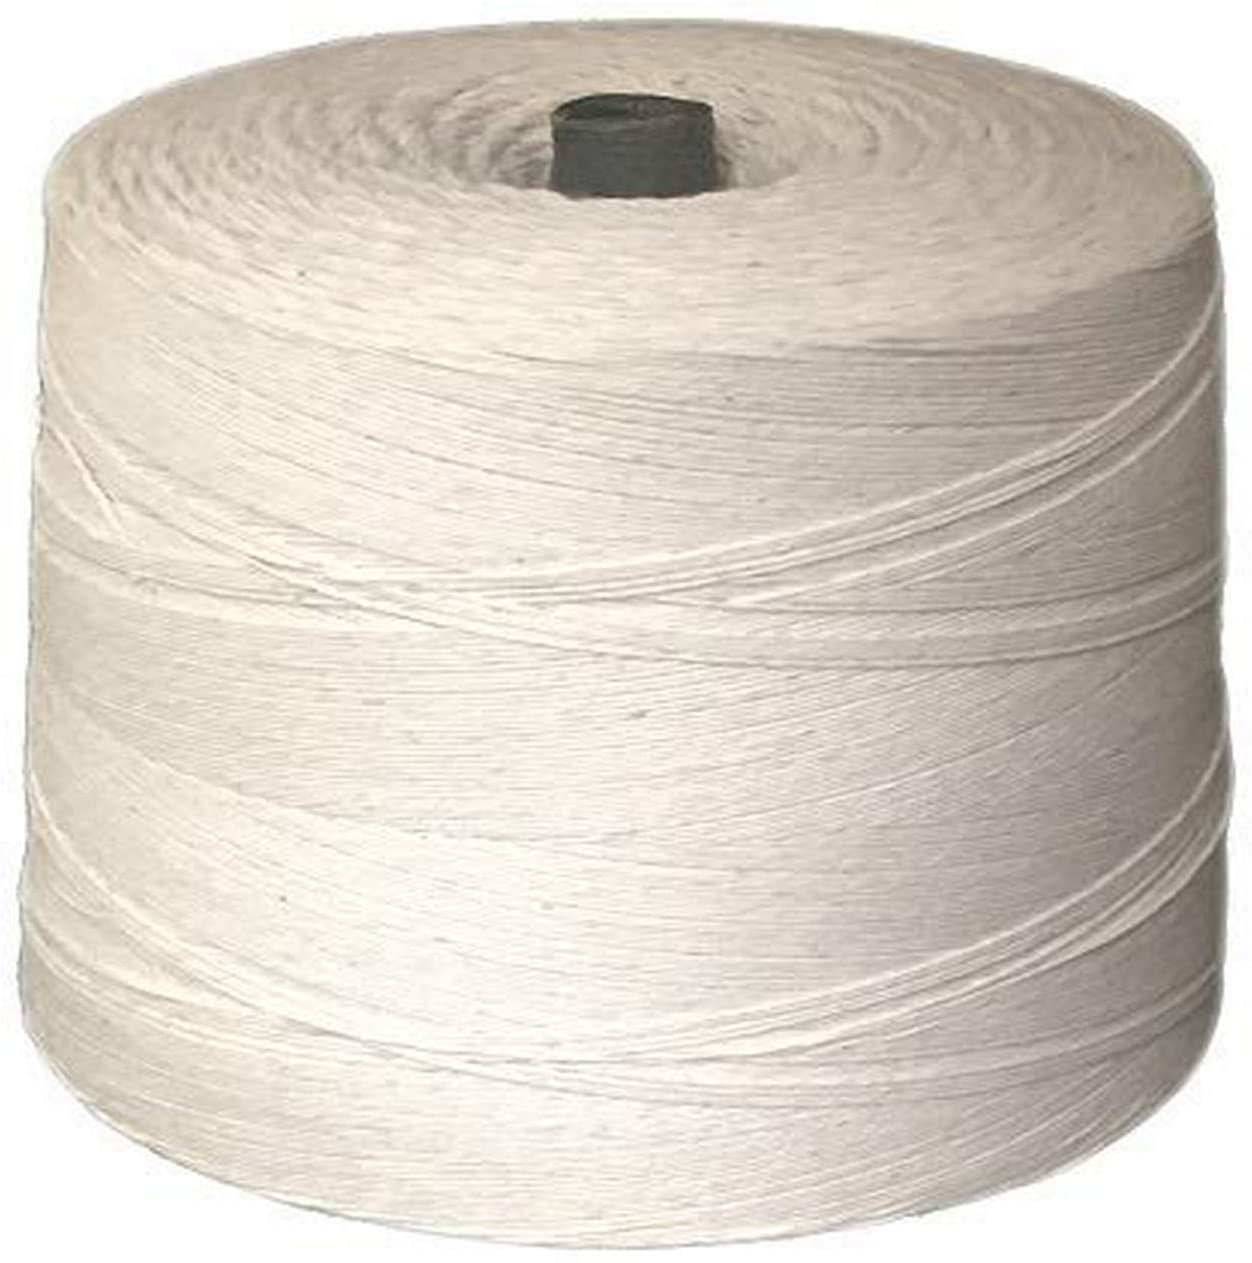 Elcoho 2 Rolls Christmas Cotton Twine Christmas Wrapping String Cotton Thread Tw 